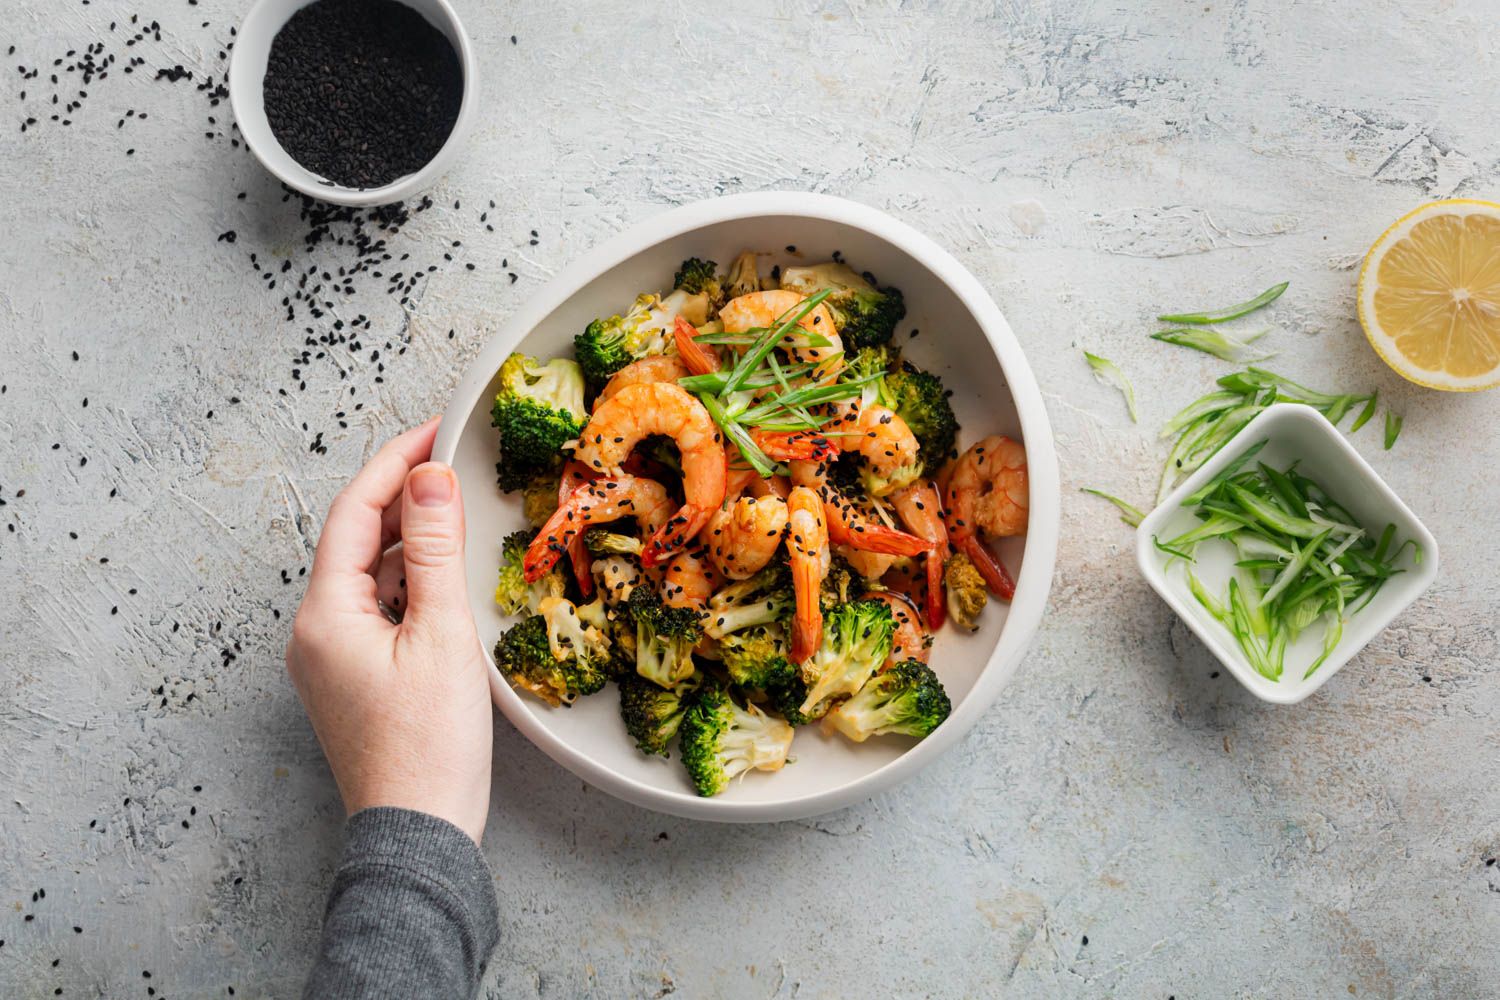 Spicy firecracker shrimp with broccoli florets in a bowl with a hand holding the bowl.